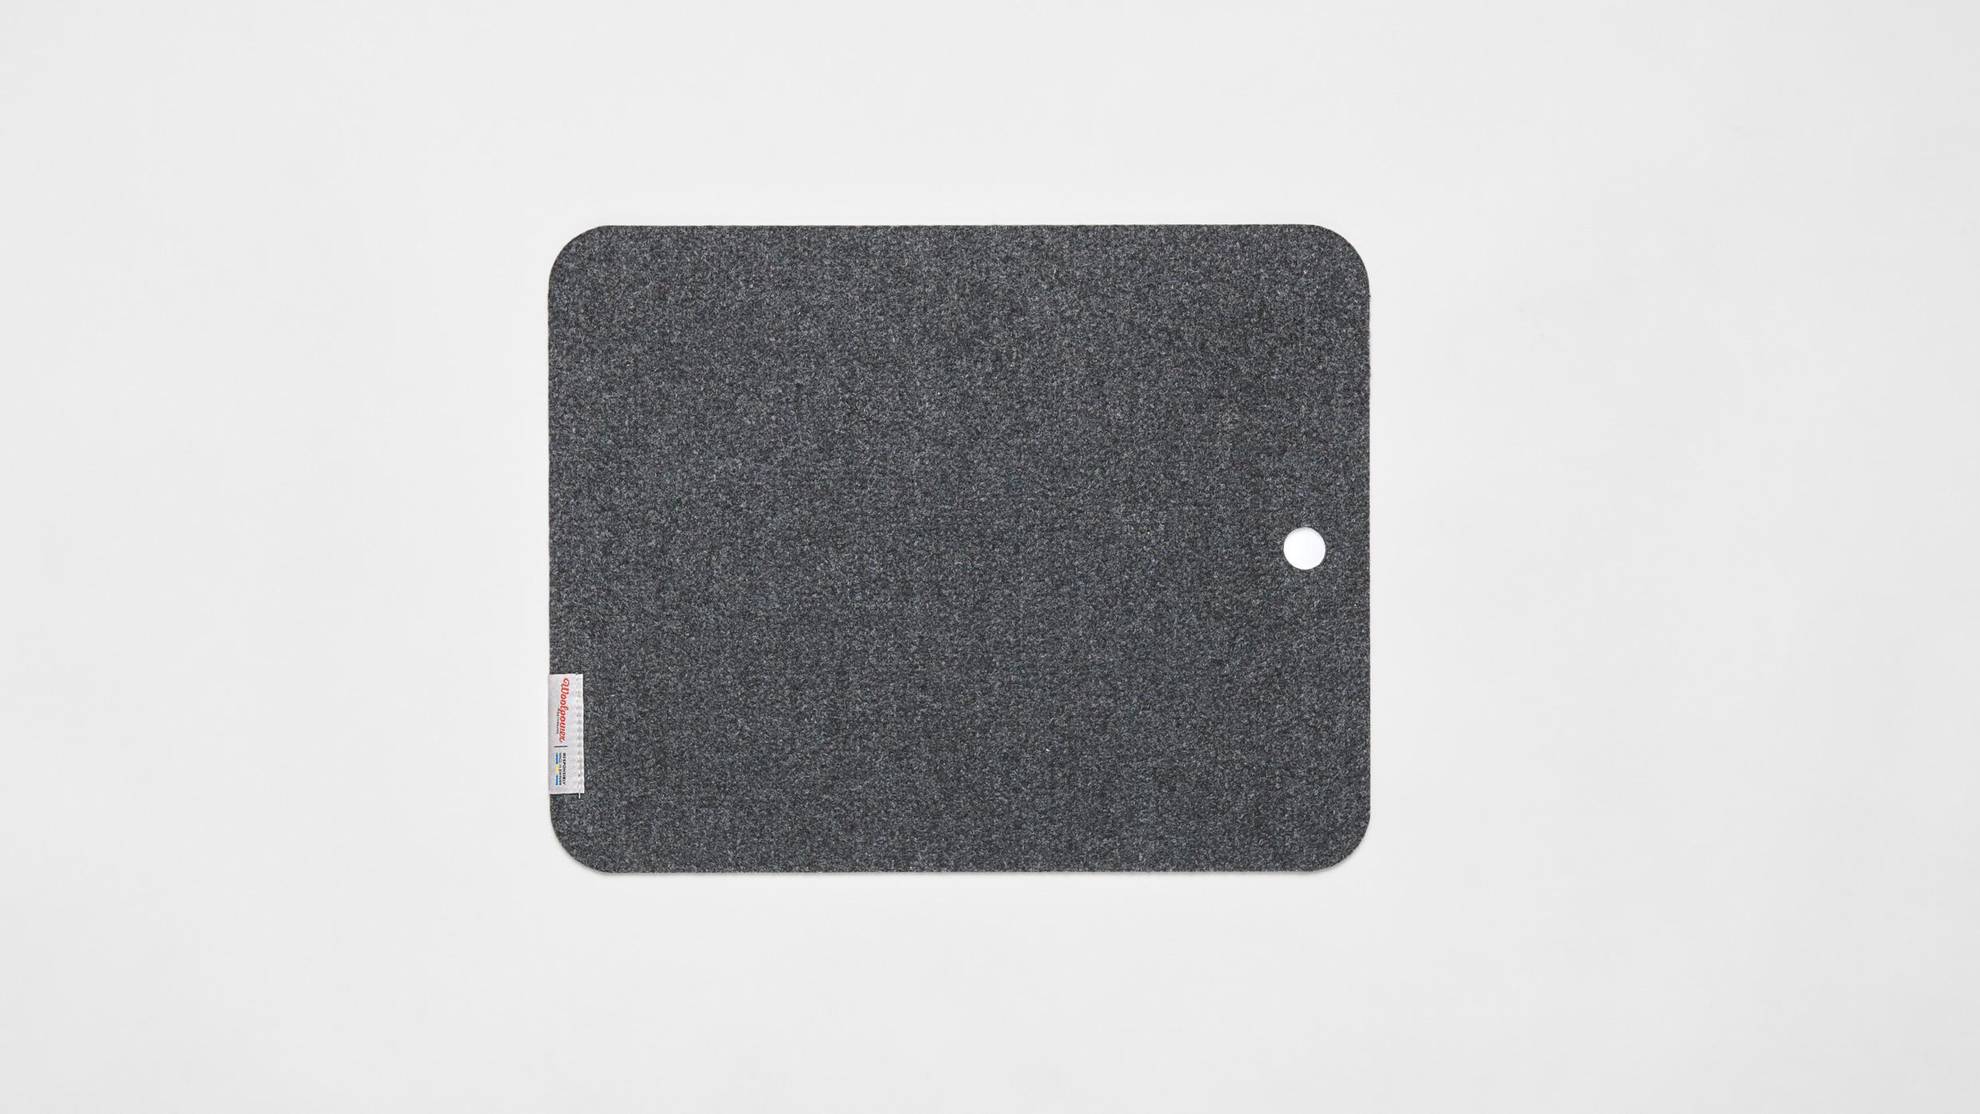 A dark grey sit pad on a white surface.